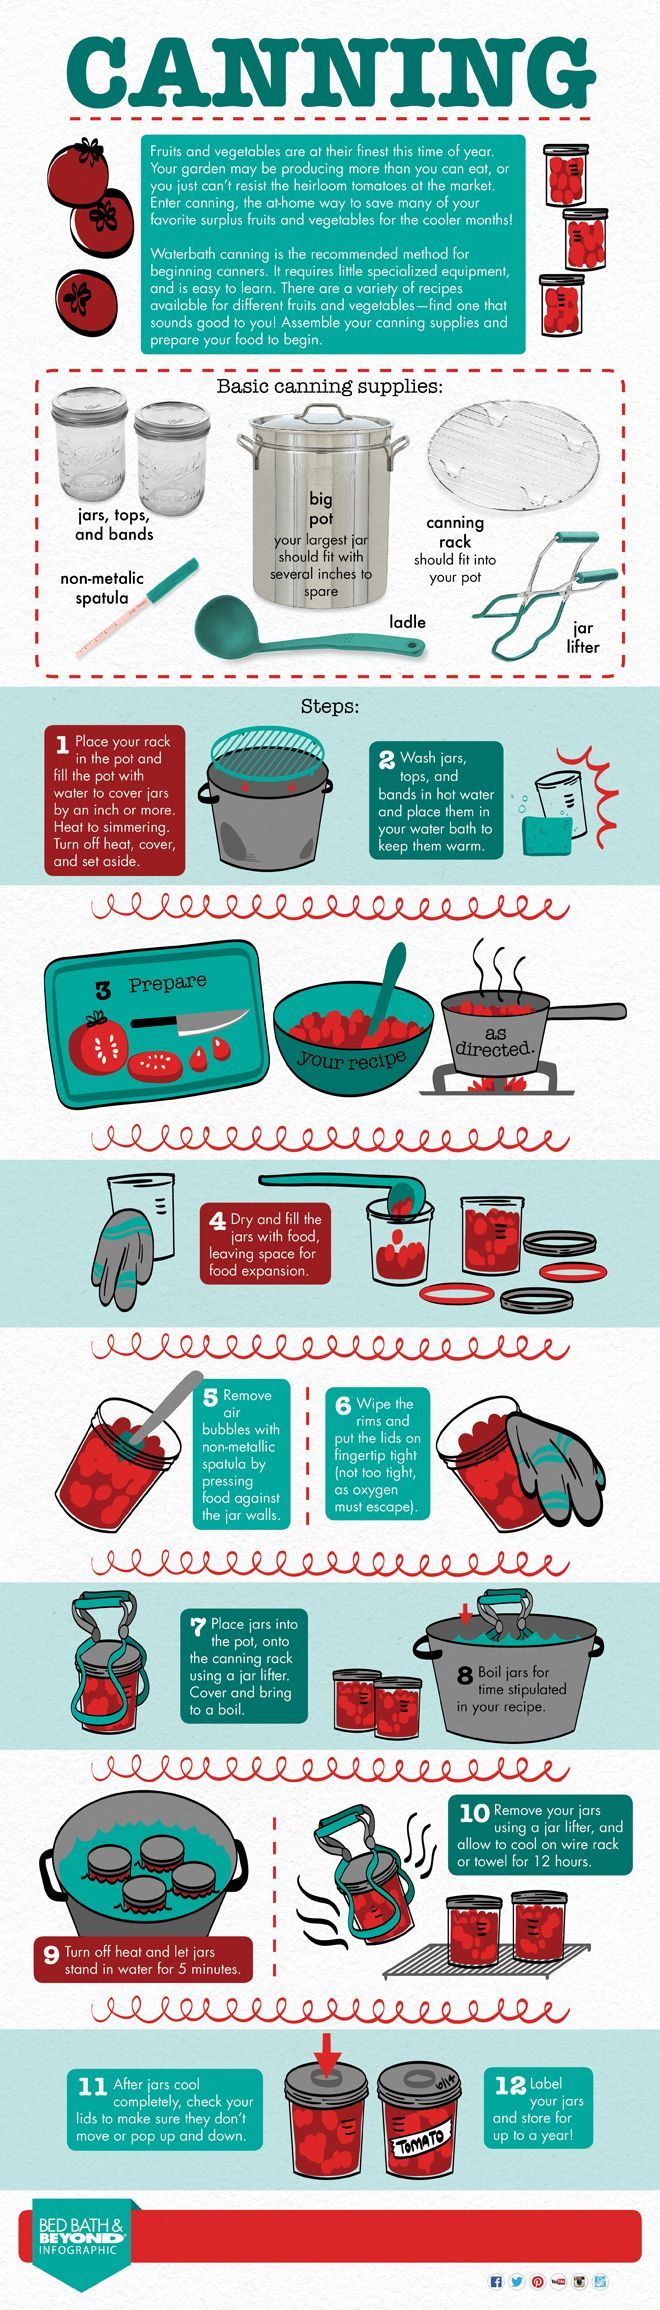 Everything you need to know about canning in an infographic!